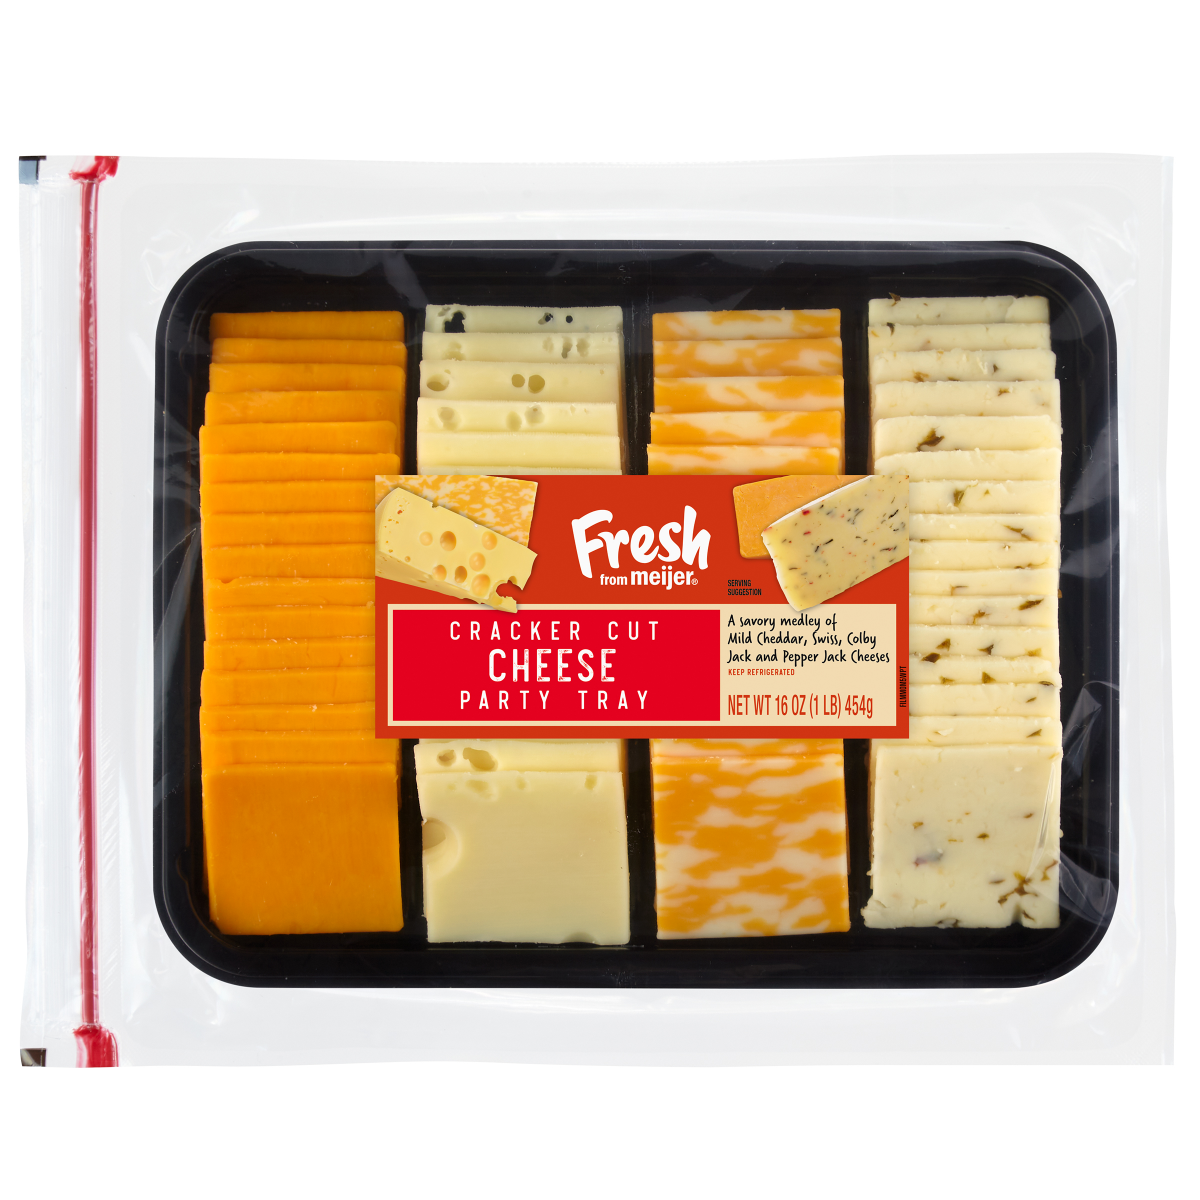 slide 1 of 5, Fresh from Meijer Cracker Cut Cheese Party Tray 16 oz - With Mild Cheddar, Swiss, Colby Jack and Pepper Jack Cheeses, 16 oz